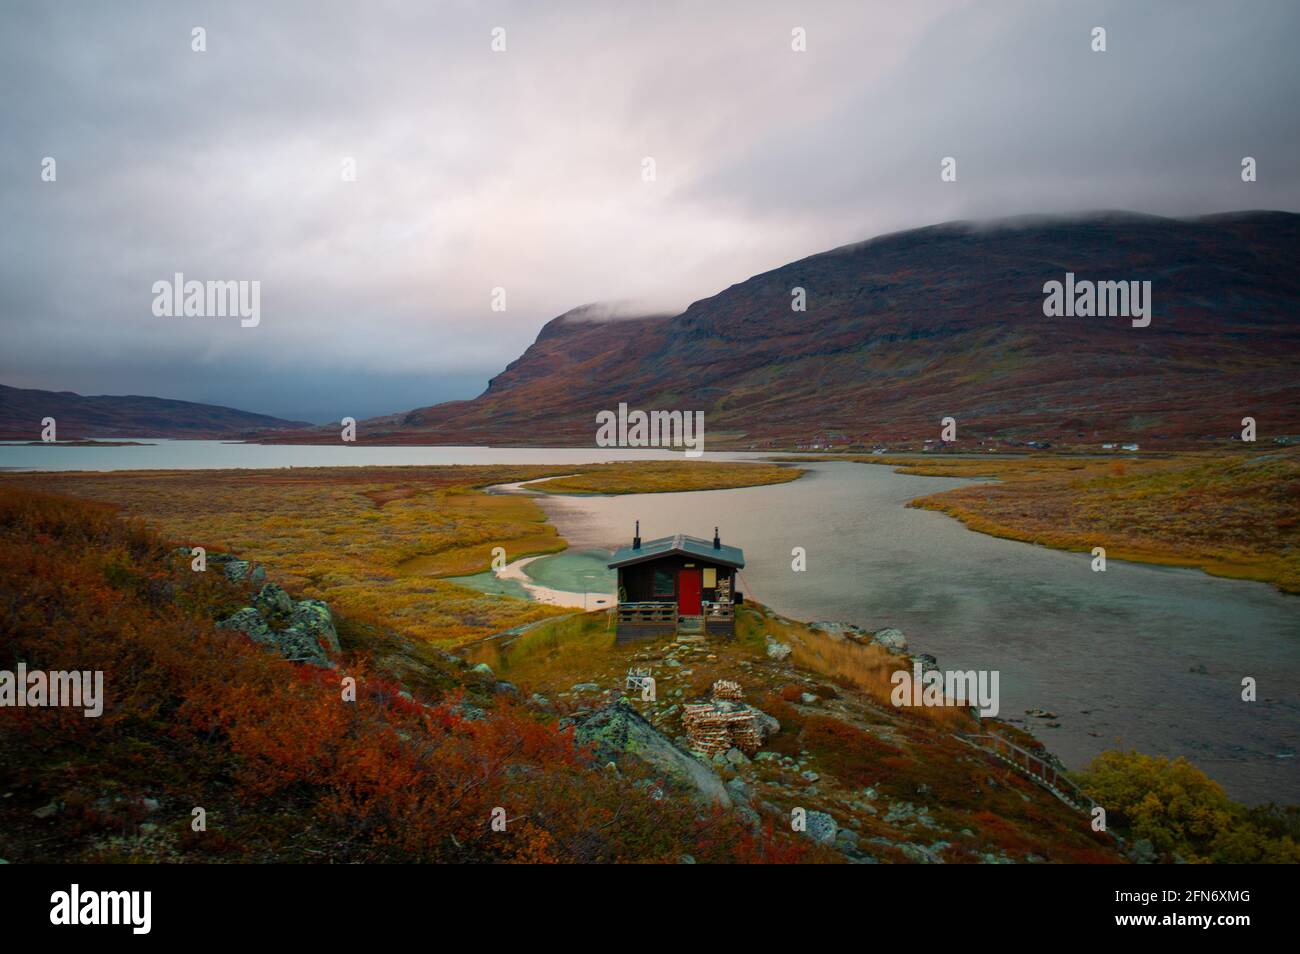 Alesjaure hut maintained by the Swedish Tourist organization, where you can stay overnight while hiking Kungsleden trail. September 2020. Stock Photo